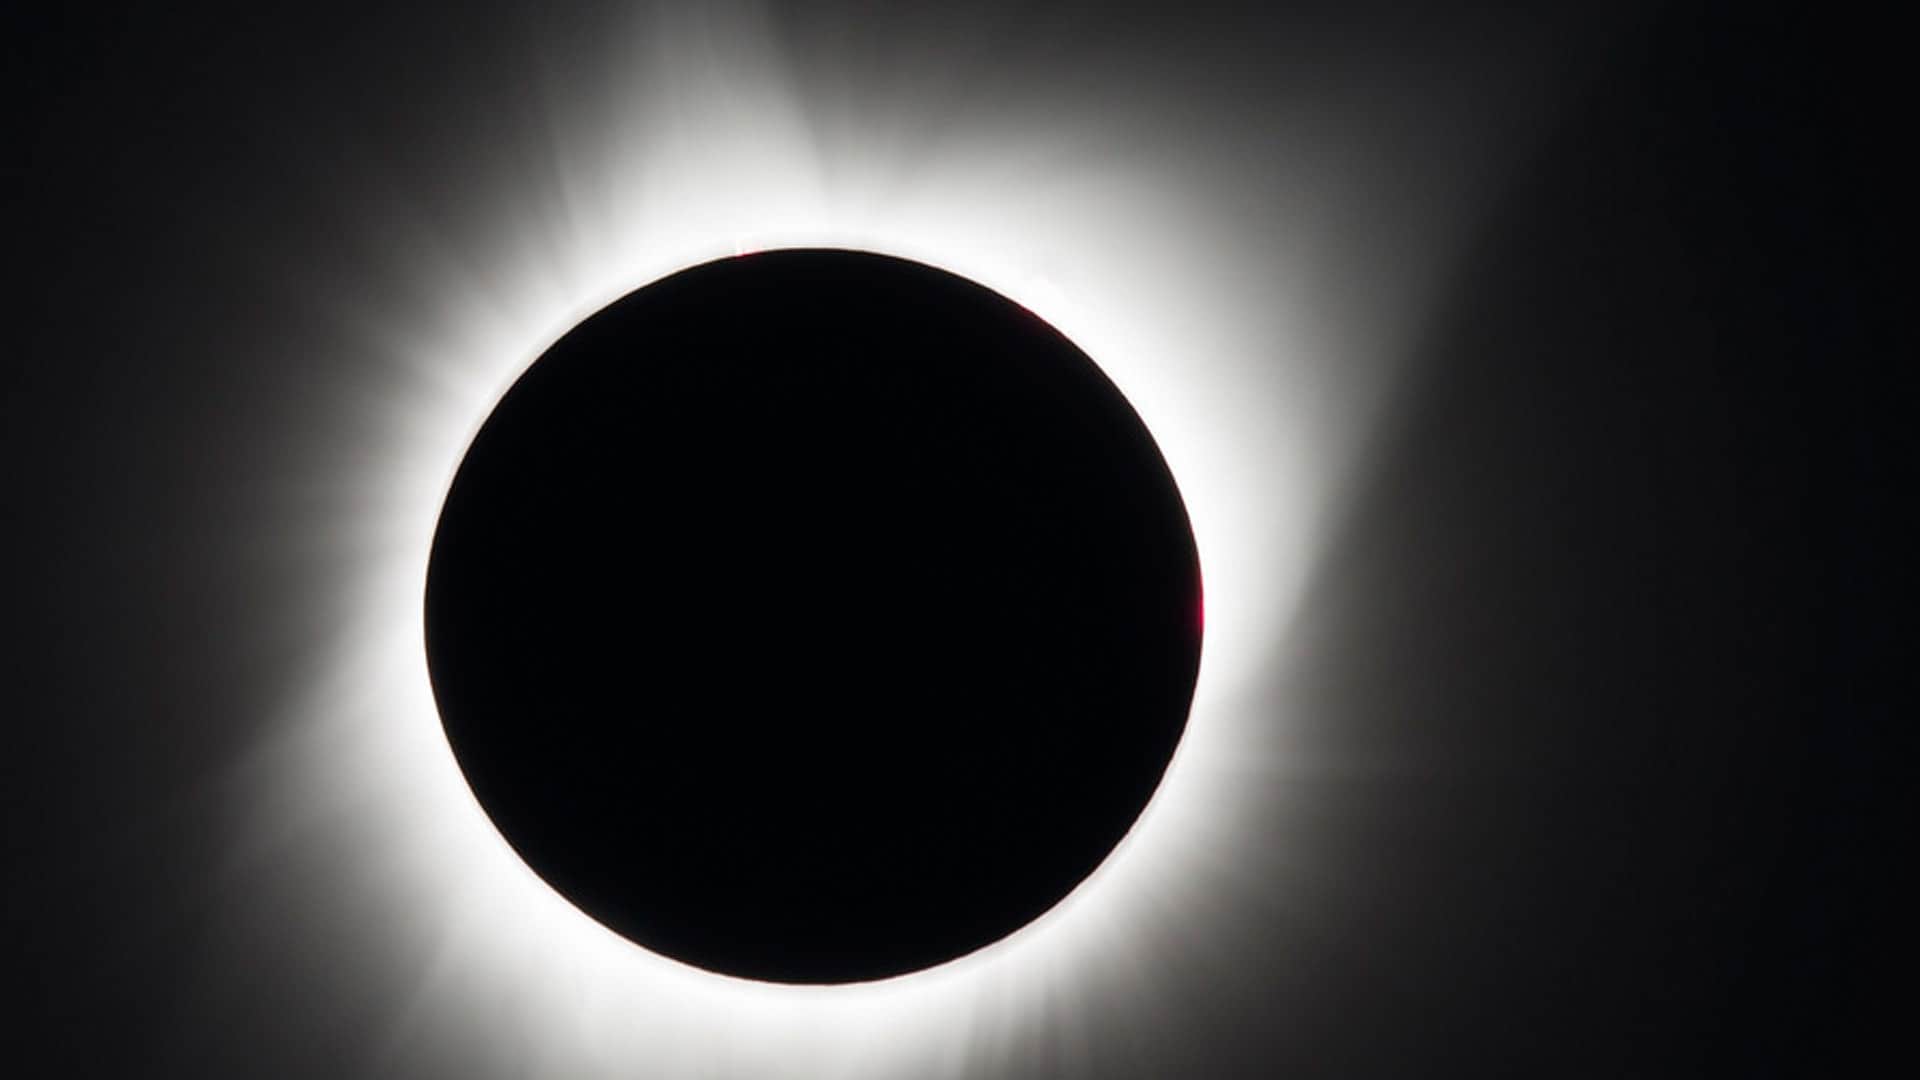 image of an eclipse